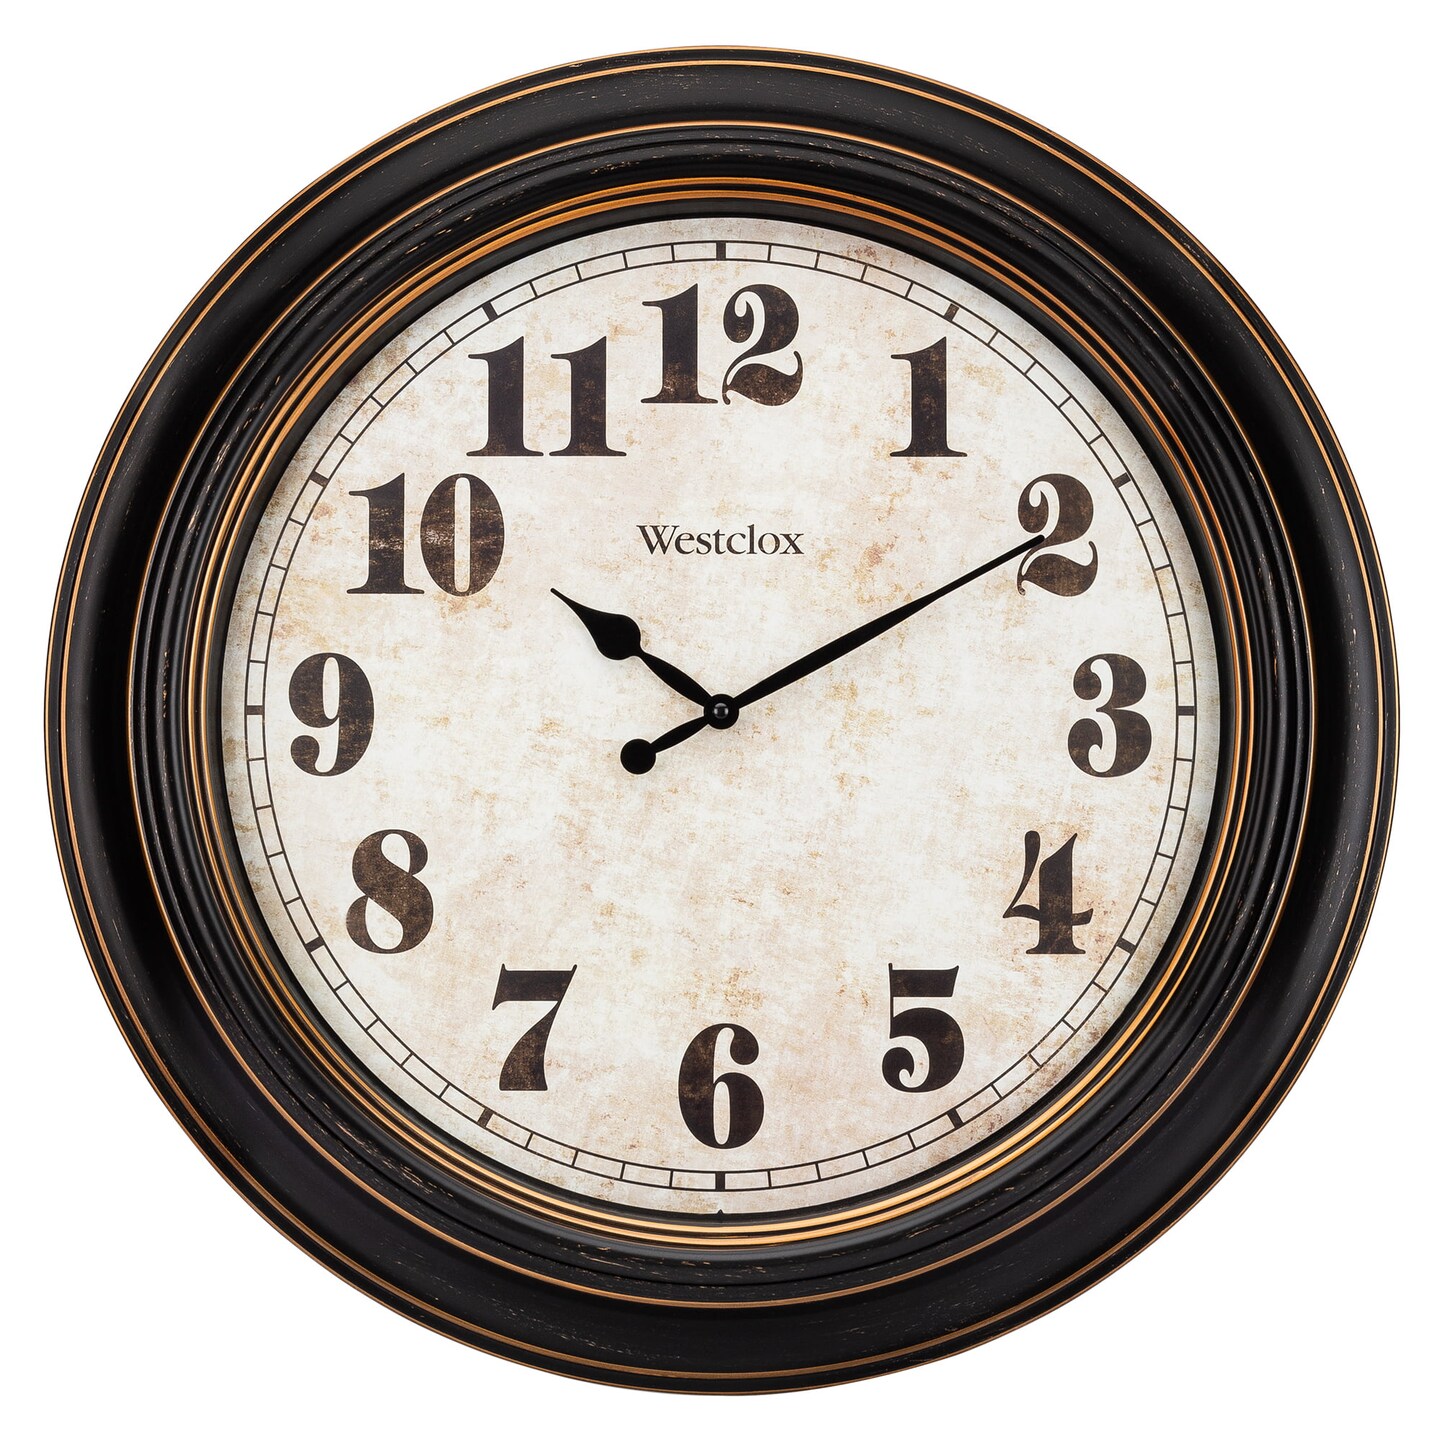 Westclox Brown and Bronze Round Oversized Classic Analog Quartz Accurate Wall Clock